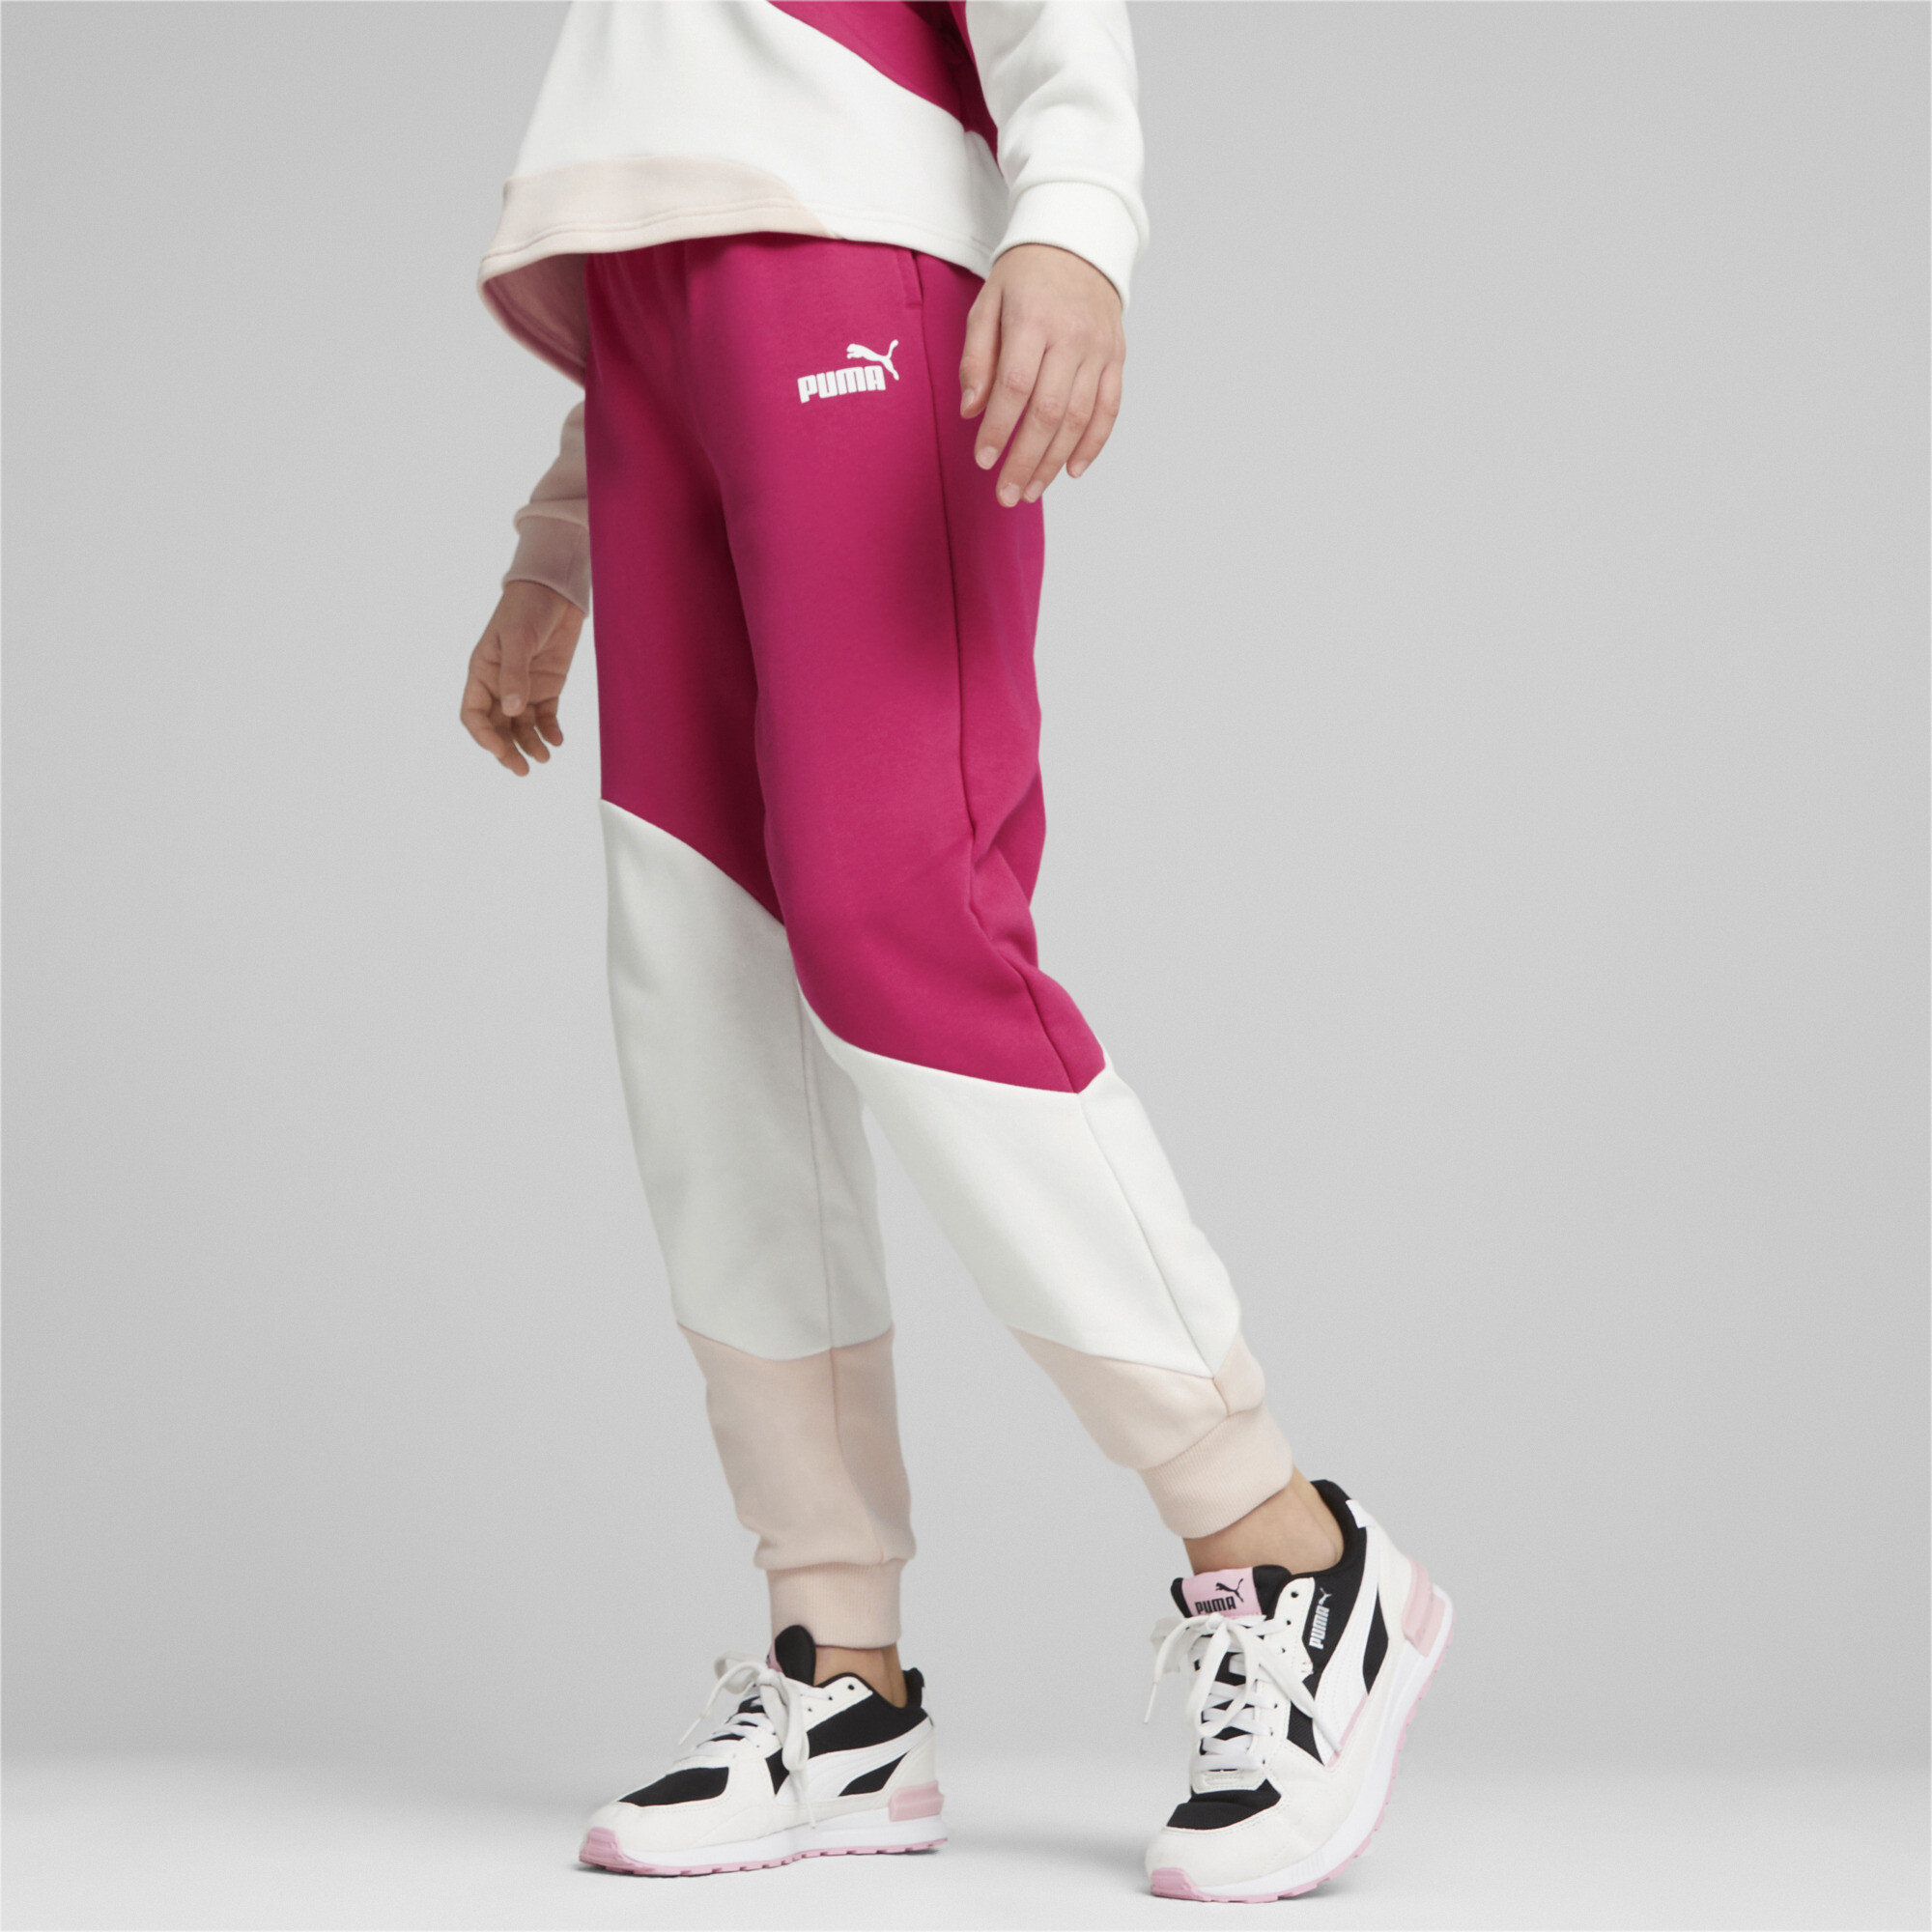 PUMA POWER Cat Pants In Pink, Size 5-6 Youth